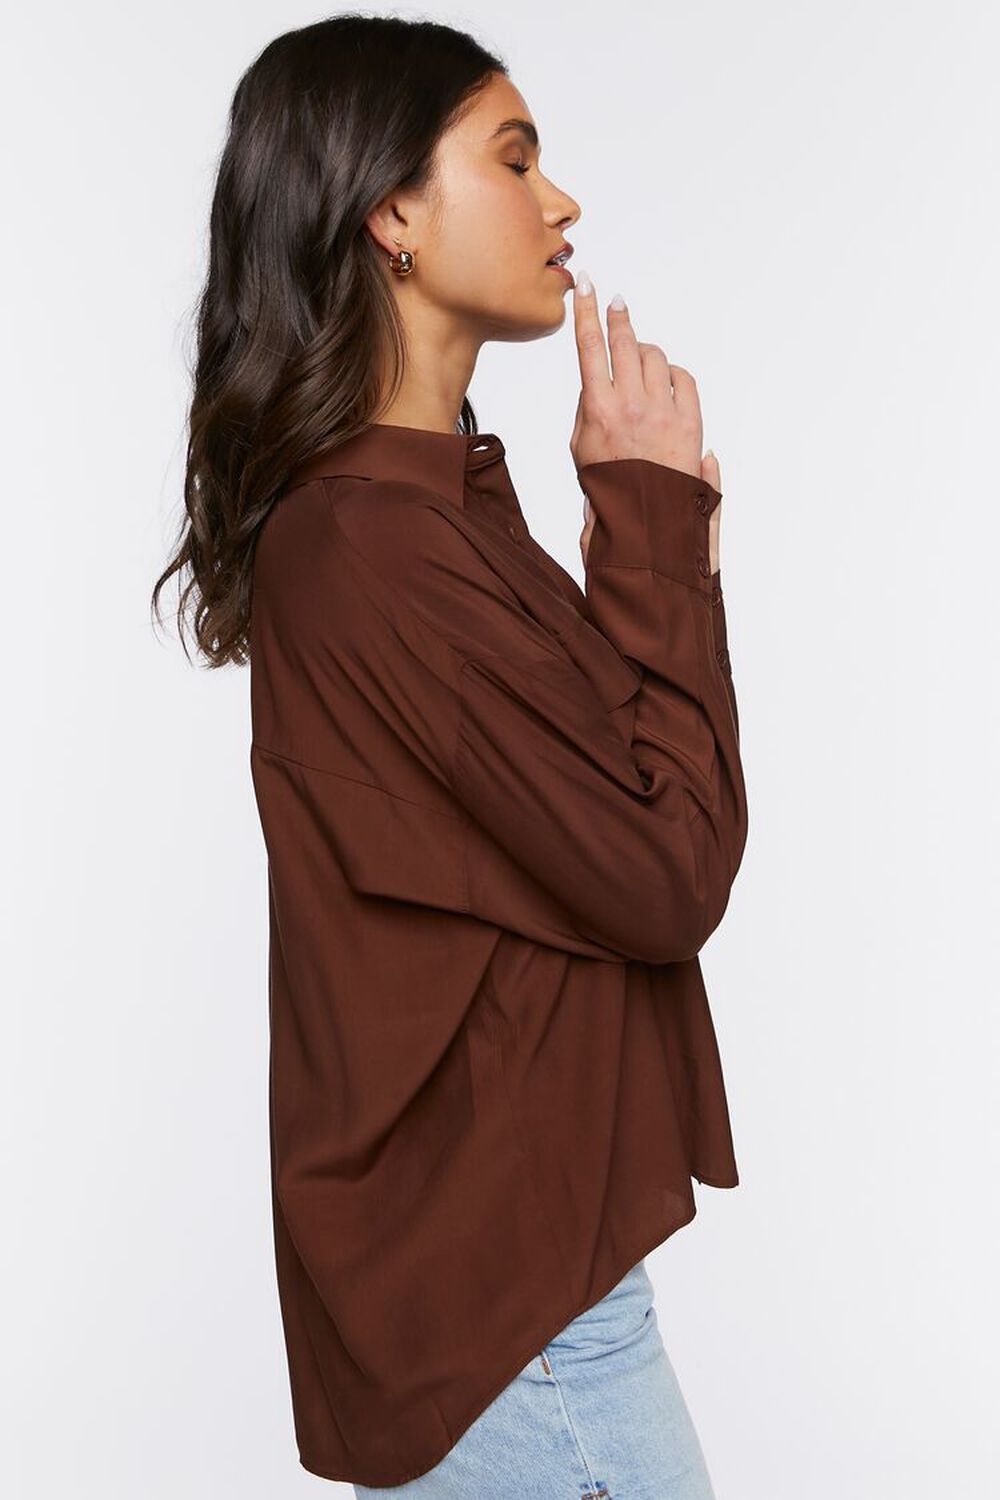 BROWN High-Low Buttoned Shirt, image 2